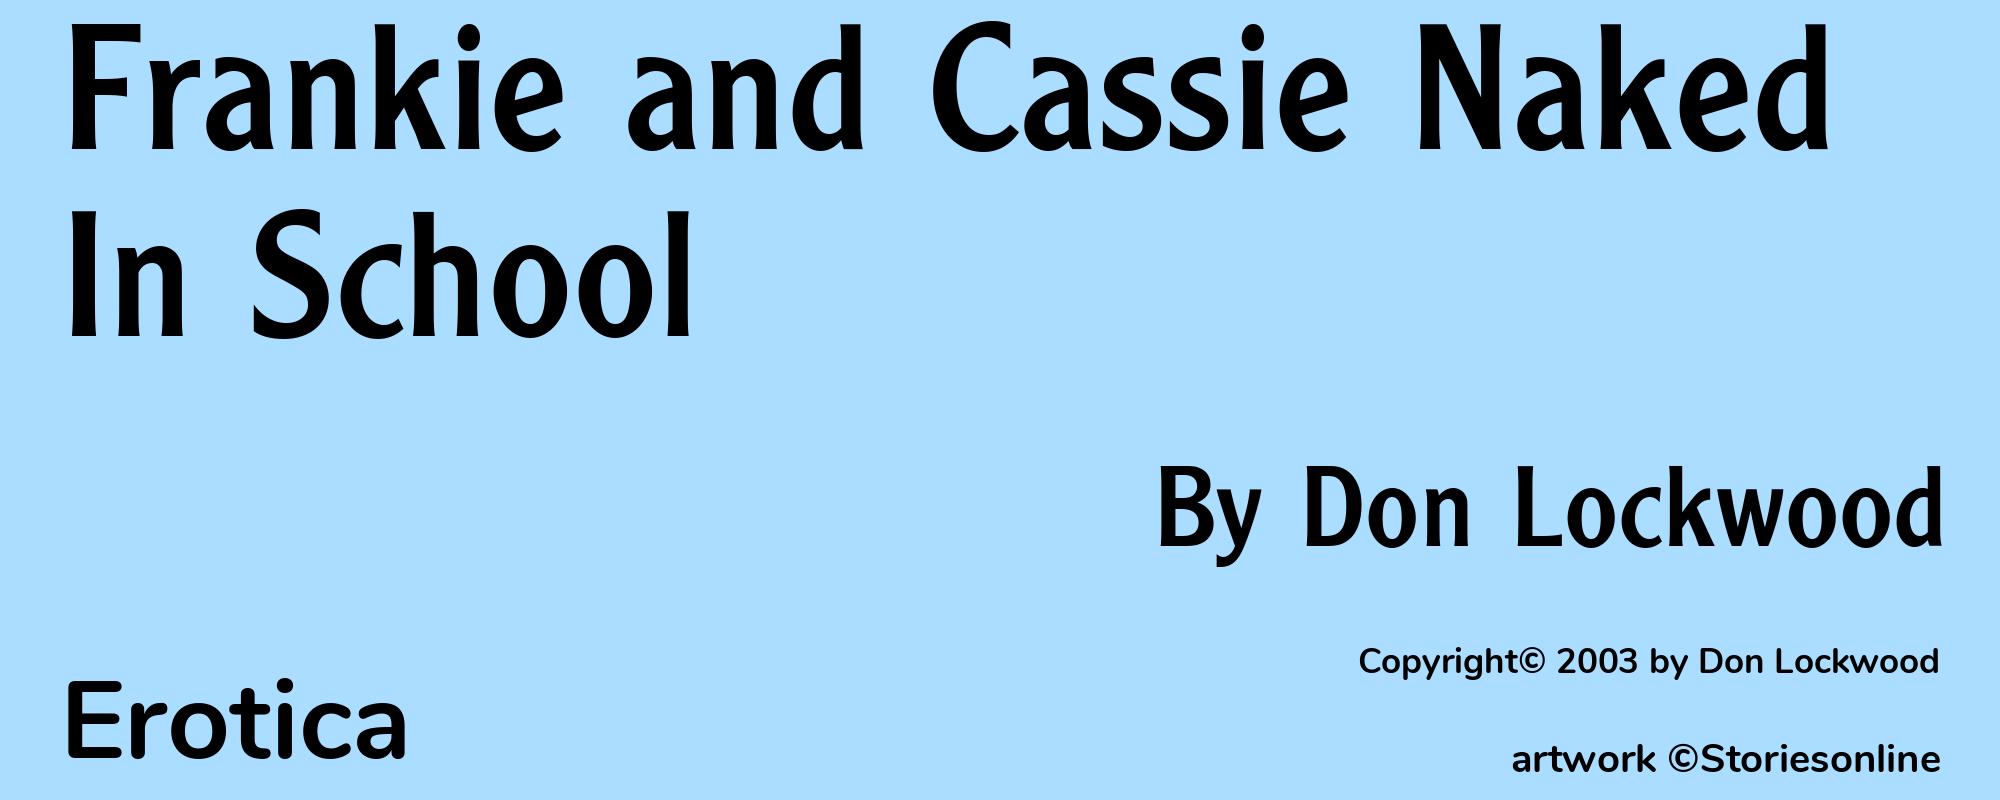 Frankie and Cassie Naked In School - Cover